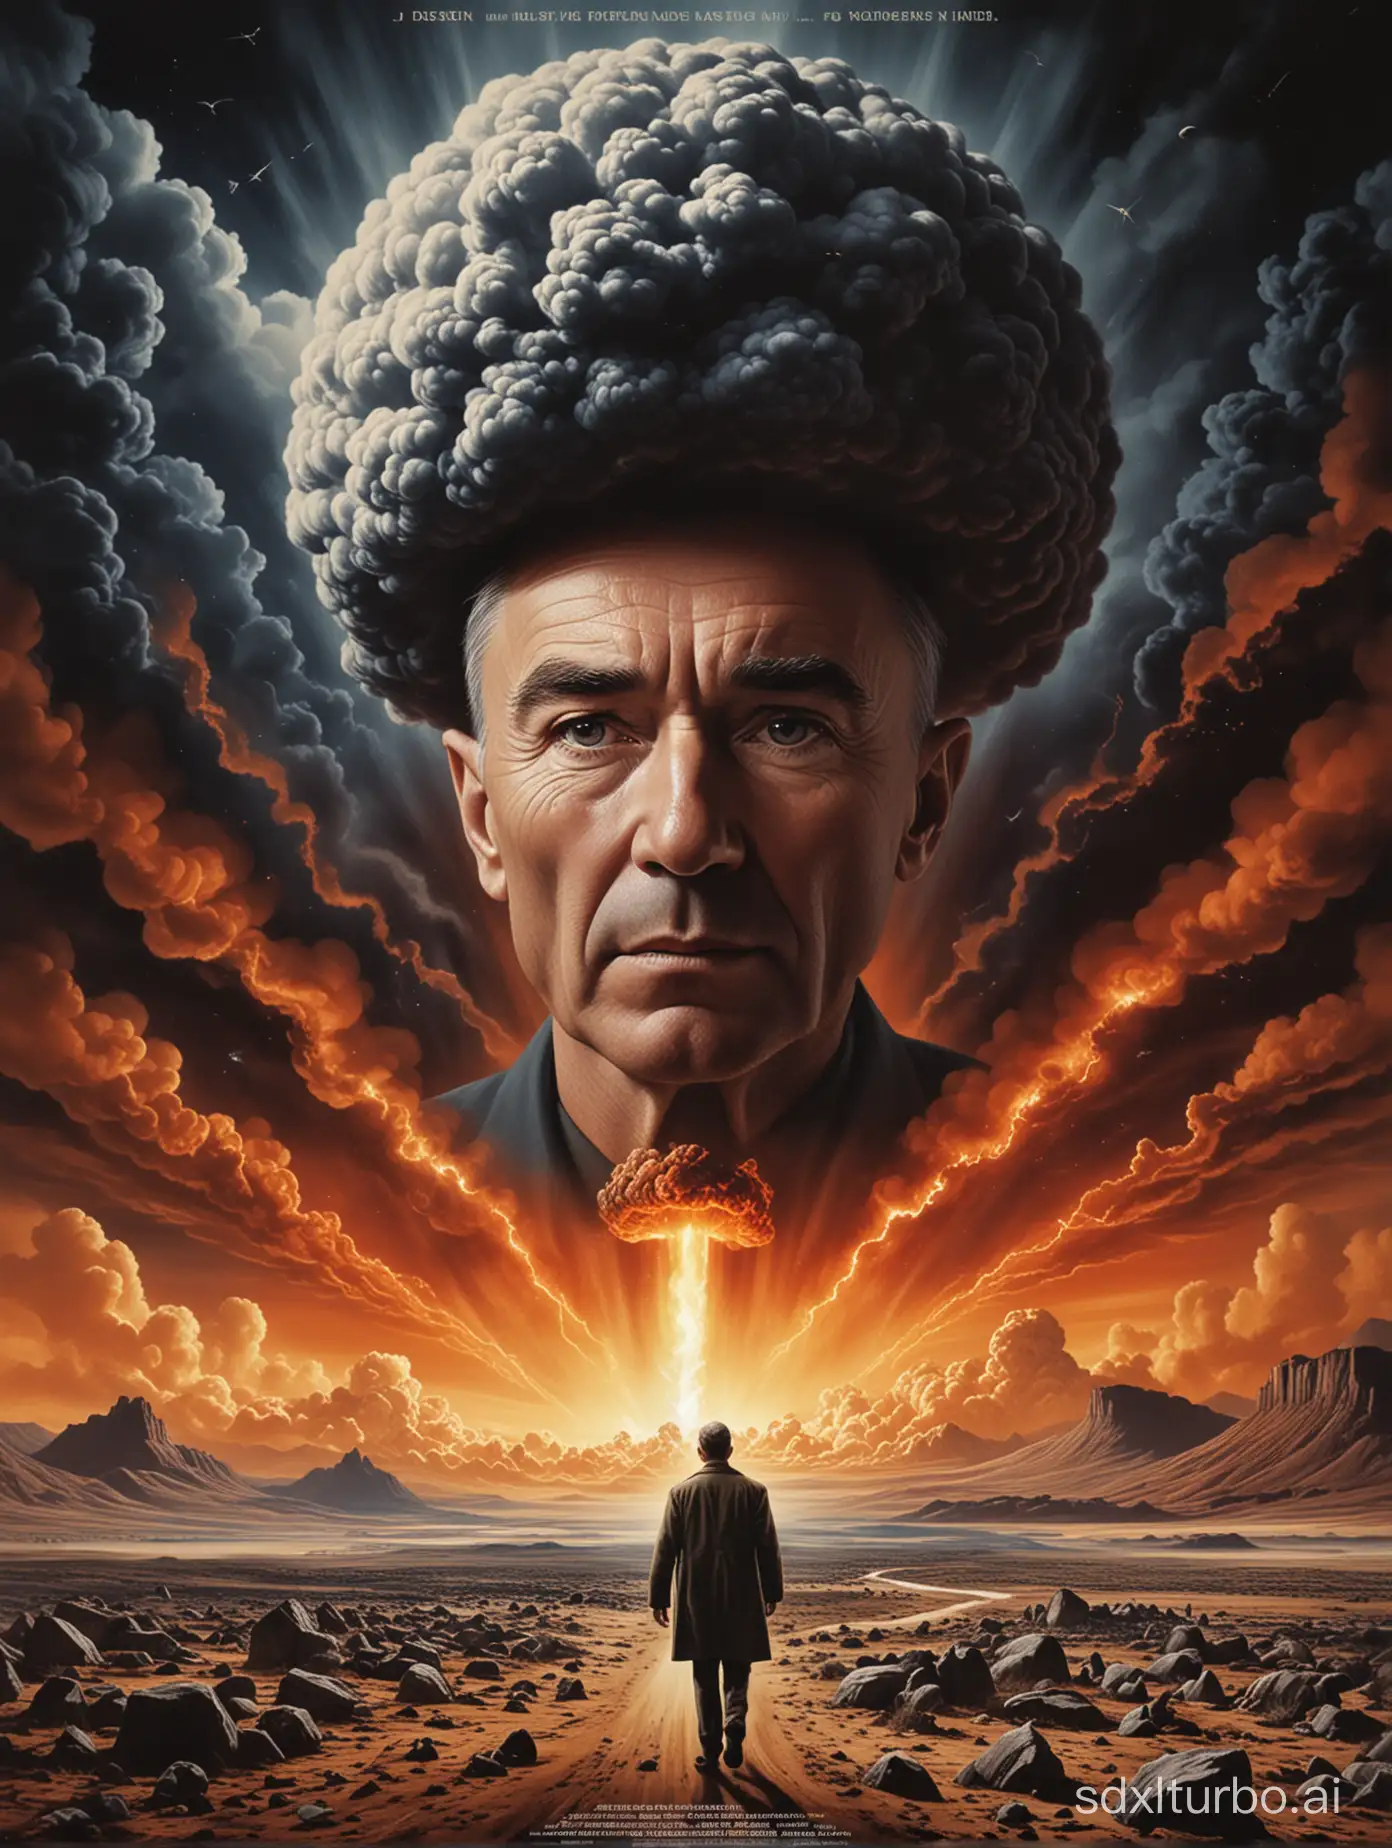 Main Visual Image:  The central focus of the poster is a portrait of J. Robert Oppenheimer, with a serious expression and deep, contemplative eyes, seemingly pondering the boundaries between science and morality. The background might feature the iconic mushroom cloud of an atomic explosion, symbolizing his historical status as the "father of the atomic bomb" and hinting at the themes explored in the film.  Color and Atmosphere:  The overall tone of the poster is likely to be in dark shades, such as deep blue or gray, creating an atmosphere of tension and mystery. The mushroom cloud may be presented in contrasting hues of orange and red, highlighting the dual nature of scientific discoveries.  Text Information:  At the top of the poster, there might be the film's title "Oppenheimer," in bold and eye-catching typography. The name of the director, Christopher Nolan, might be placed in a prominent position with smaller but still noticeable font, attracting the audience's attention. The bottom of the poster could list the names of the main actors, as well as the film's release date and award information, such as "Academy Award for Best Picture."  Other Design Elements:  The poster might include abstract scientific elements, such as atomic models or equation symbols, to emphasize the scientific background of the film. There could be a thought-provoking tagline or a key line from the film to further pique the viewer's interest.